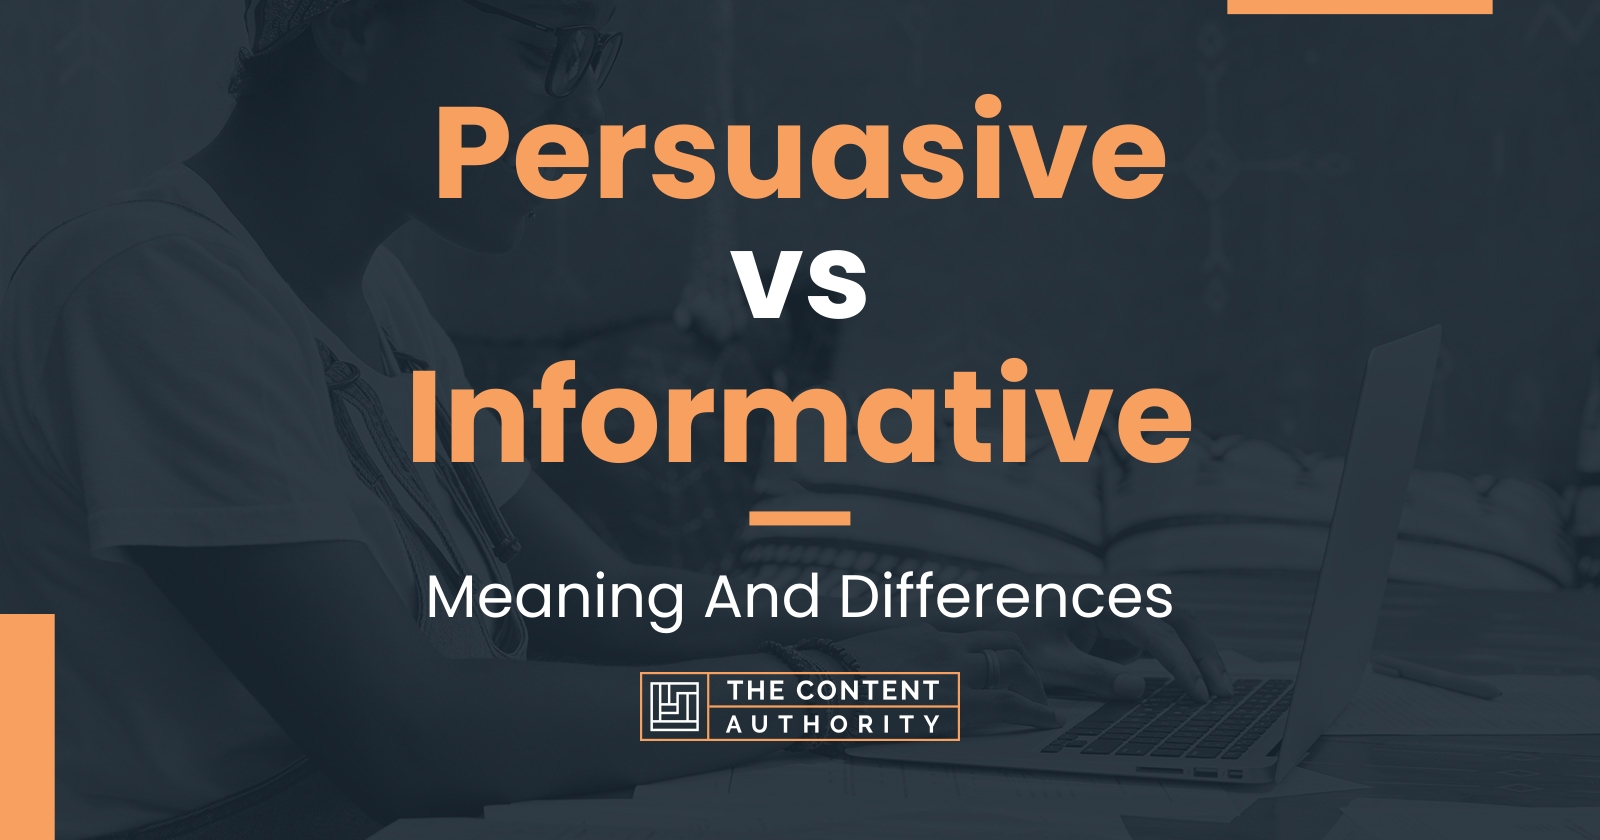 Persuasive vs Informative: Meaning And Differences